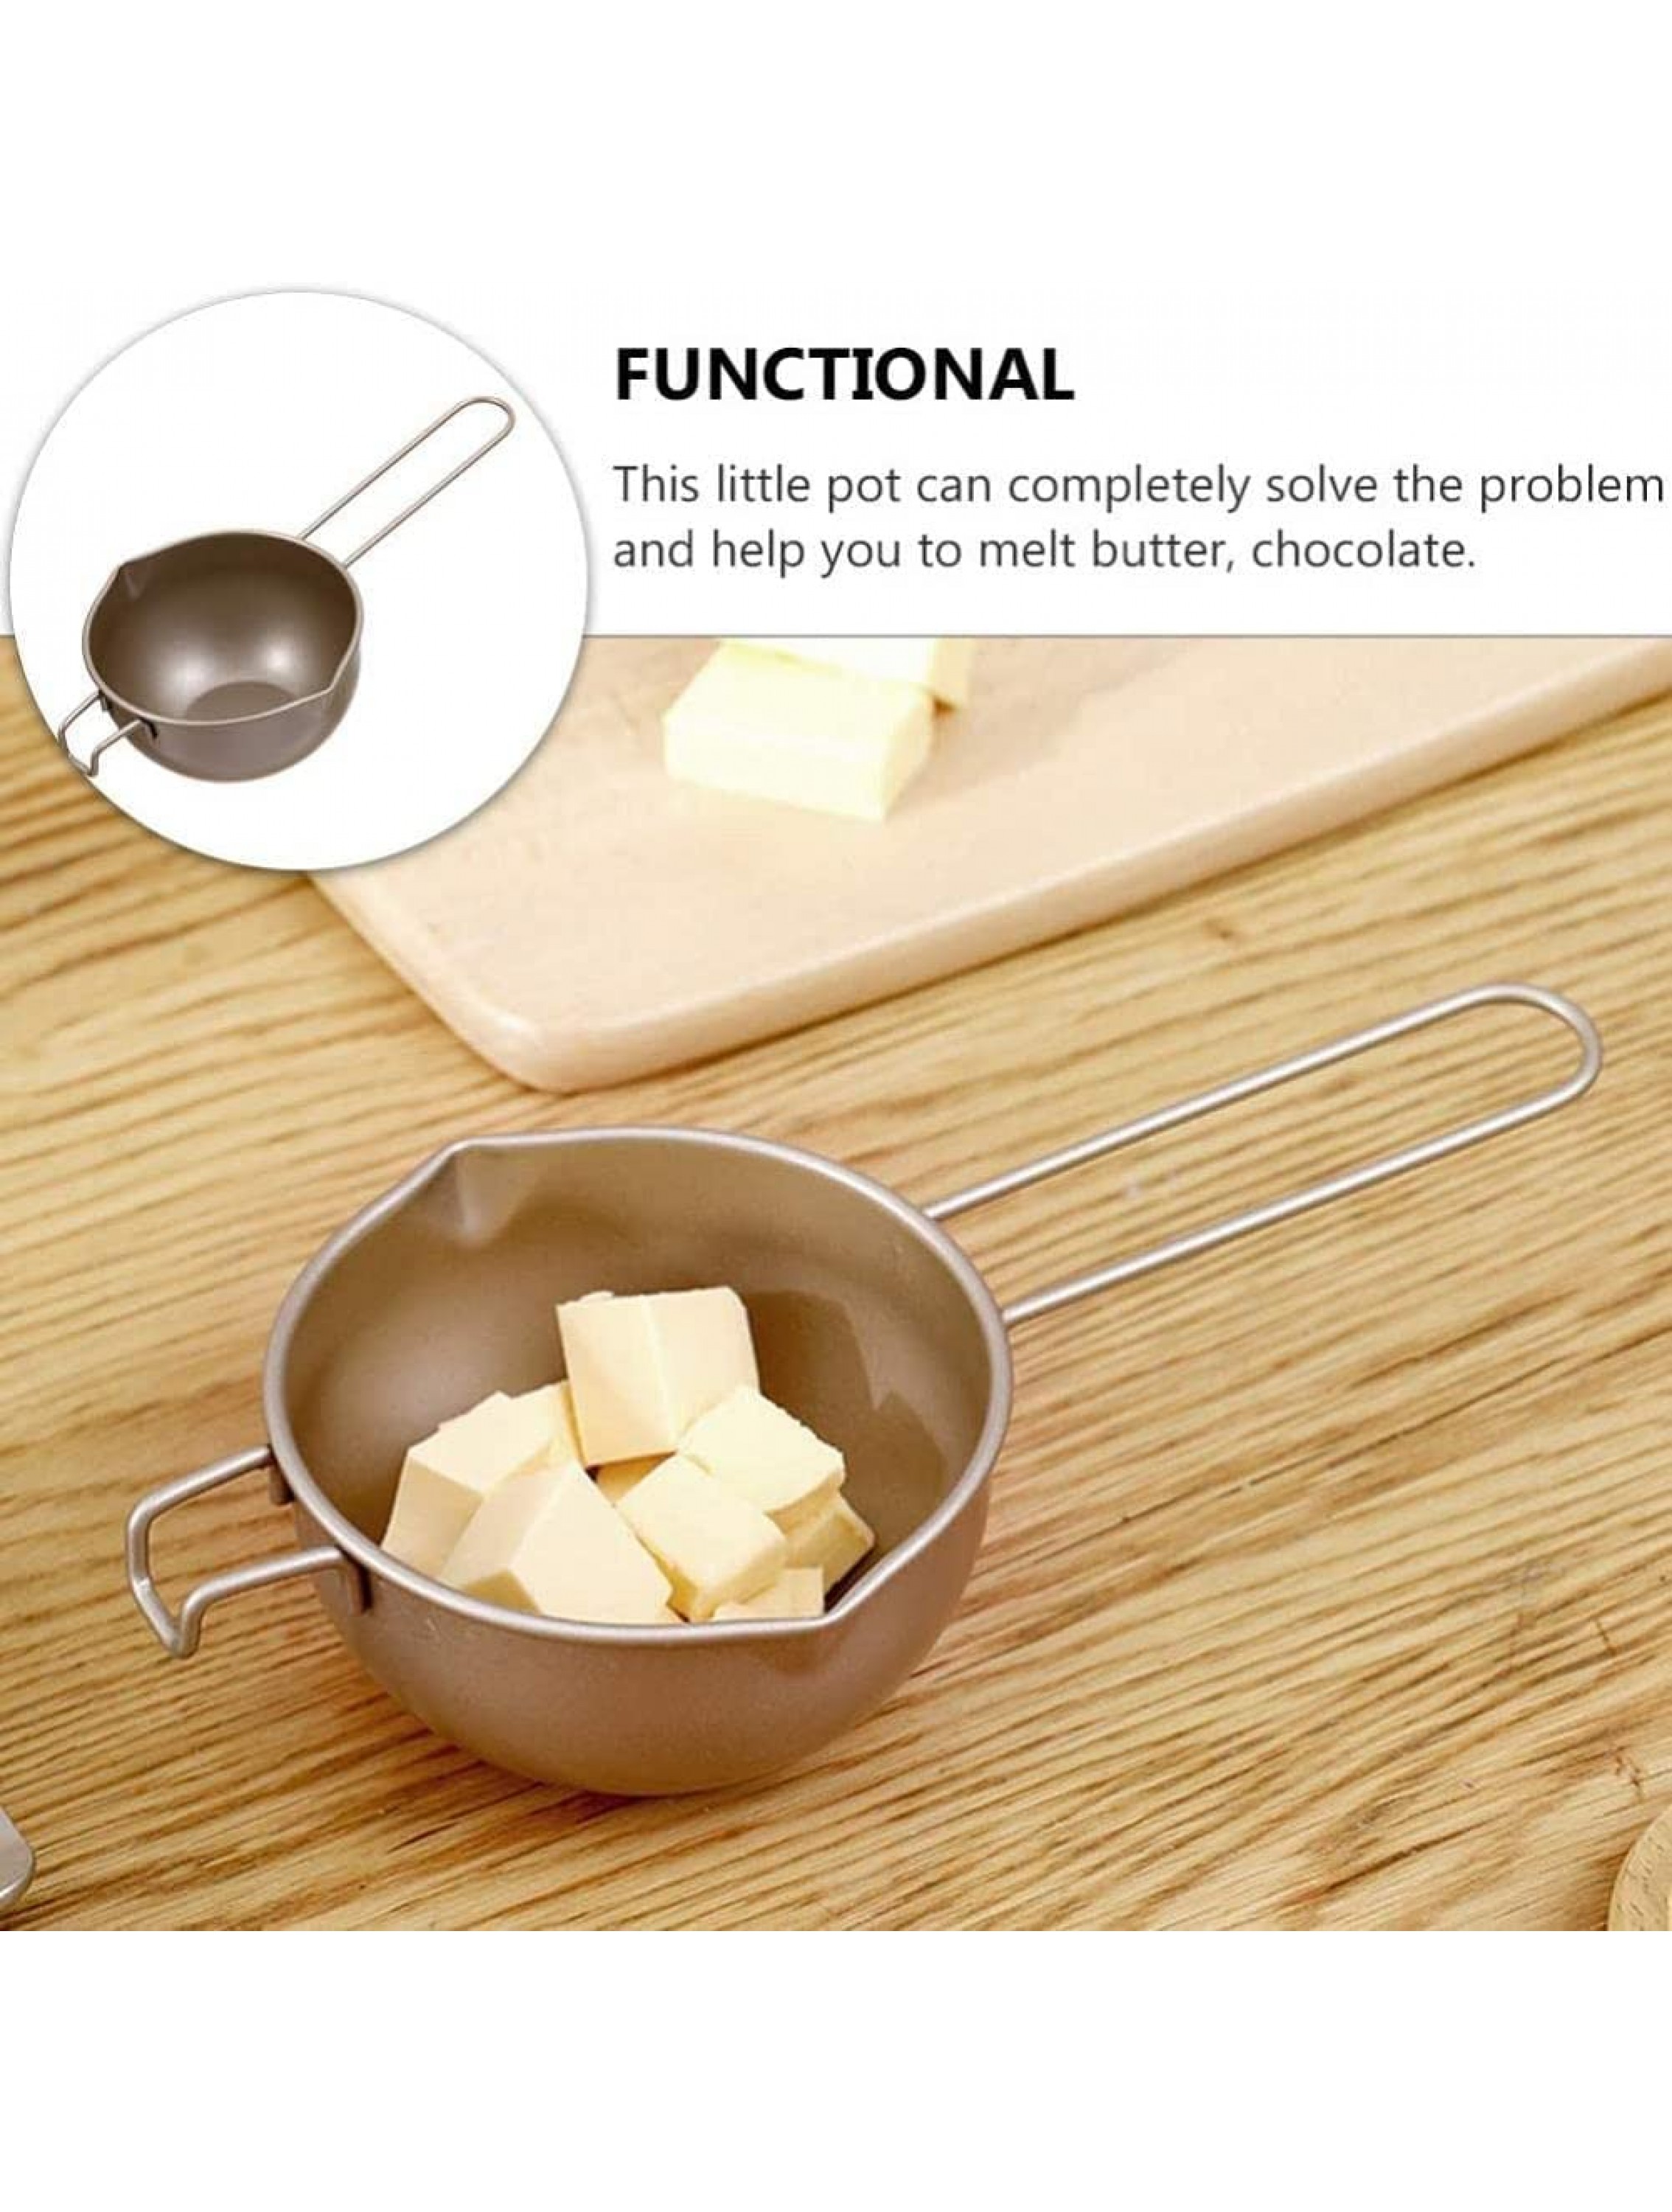 Butter Warmer Stainless Steel Measuring Pan Scoop Chocolate Pot Home DIY Baking Tool for Melting Chocolate Candy Butter Candle Cheese - BLPKVIR16